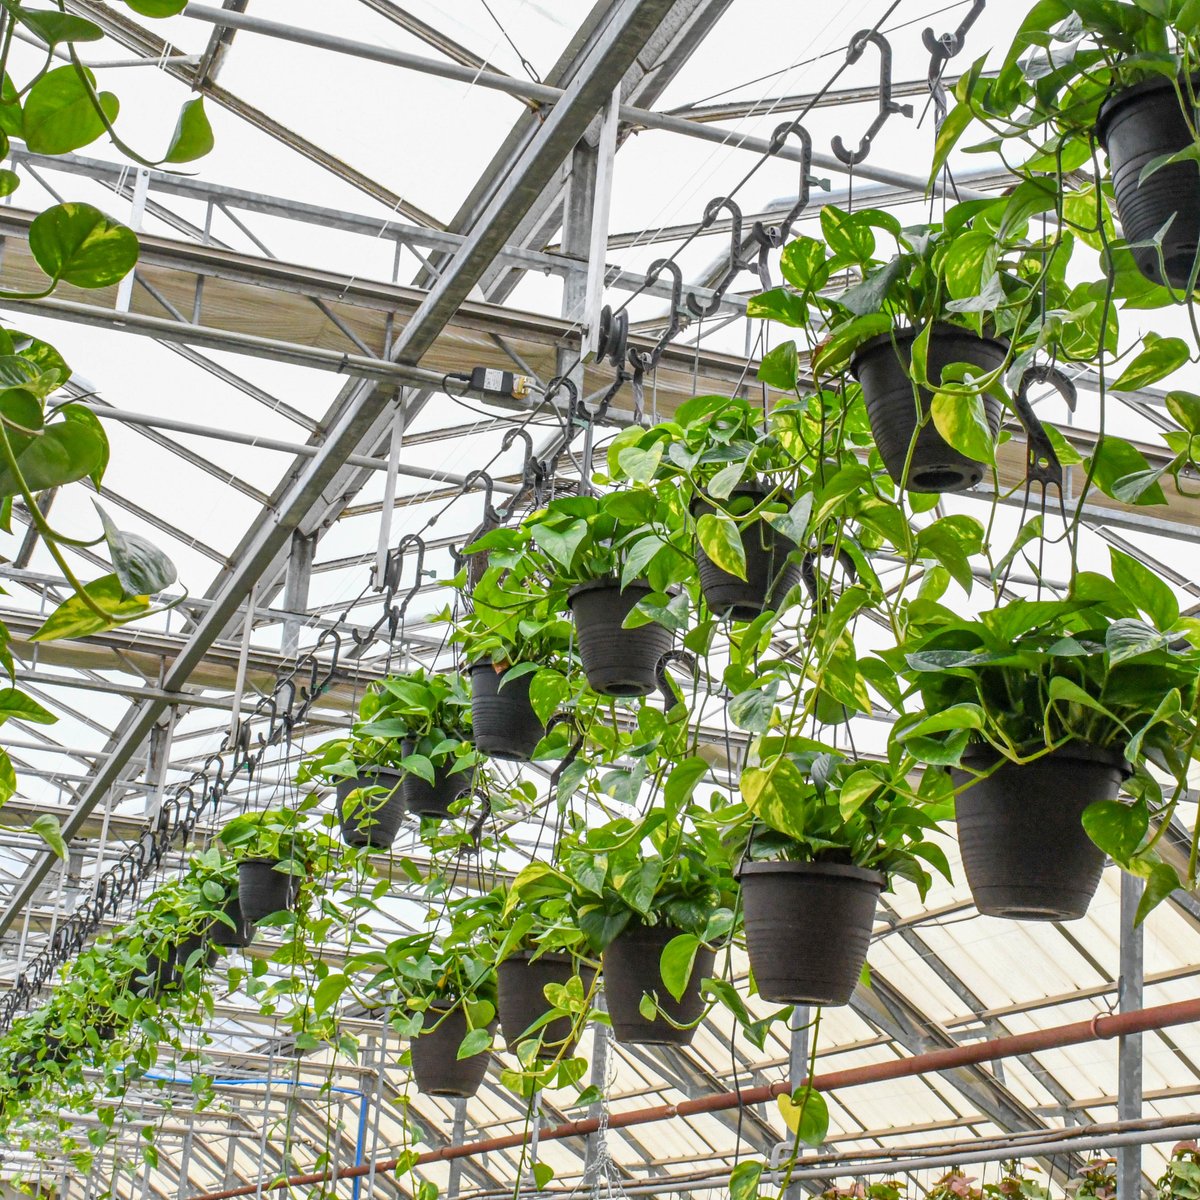 Elevate your space with our stunning plant hanging baskets 🌿✨
Contact your sales representative for more information! 

#colasantifarms #colasantifarmsltd #wholesaleplants #greenhouse #plantsmakepeoplehappy #foliage #homedecor #plants #pothos #hangingbaskets #hangingplants